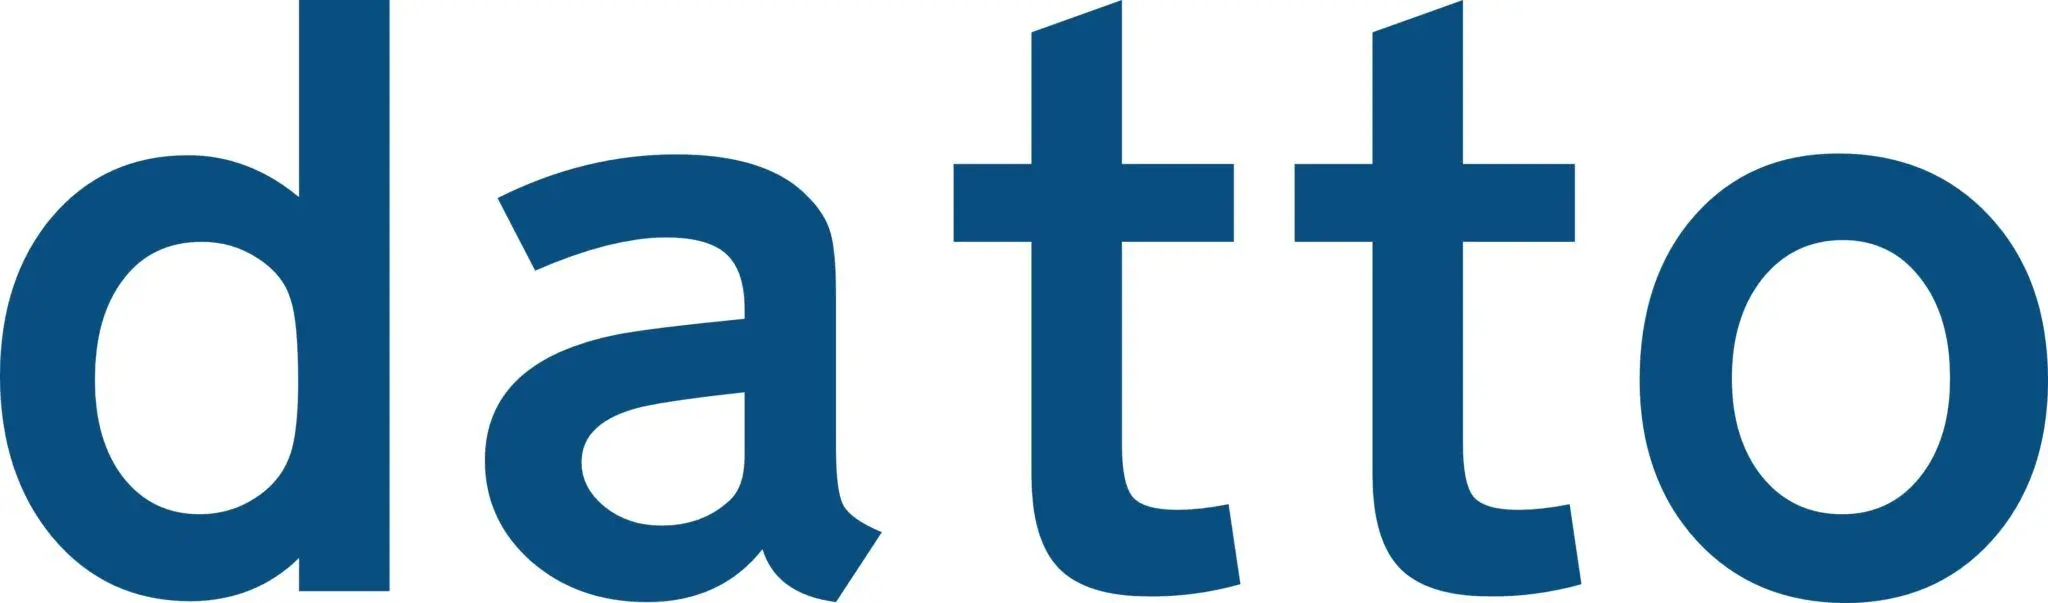 datto saas protection